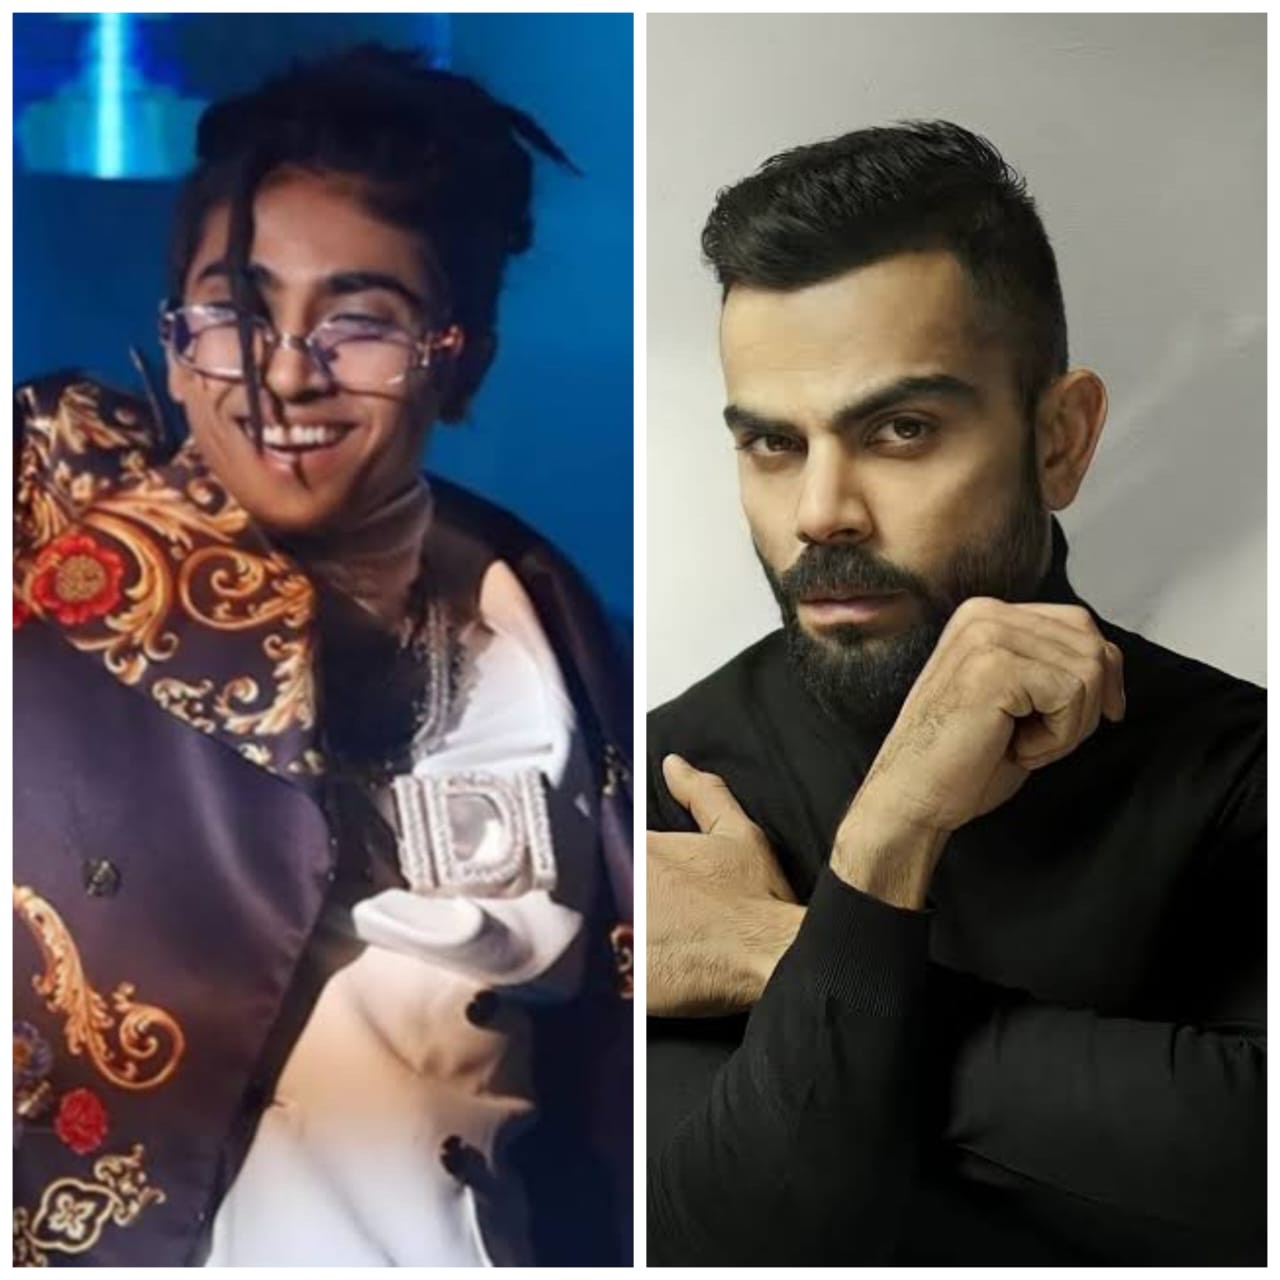 After wearing the crown of Bigg Boss like the boss, Mc Stan fans prove why he is the real winner, making his recent post one of the most liked, surpassing Virat Kohli's post likes